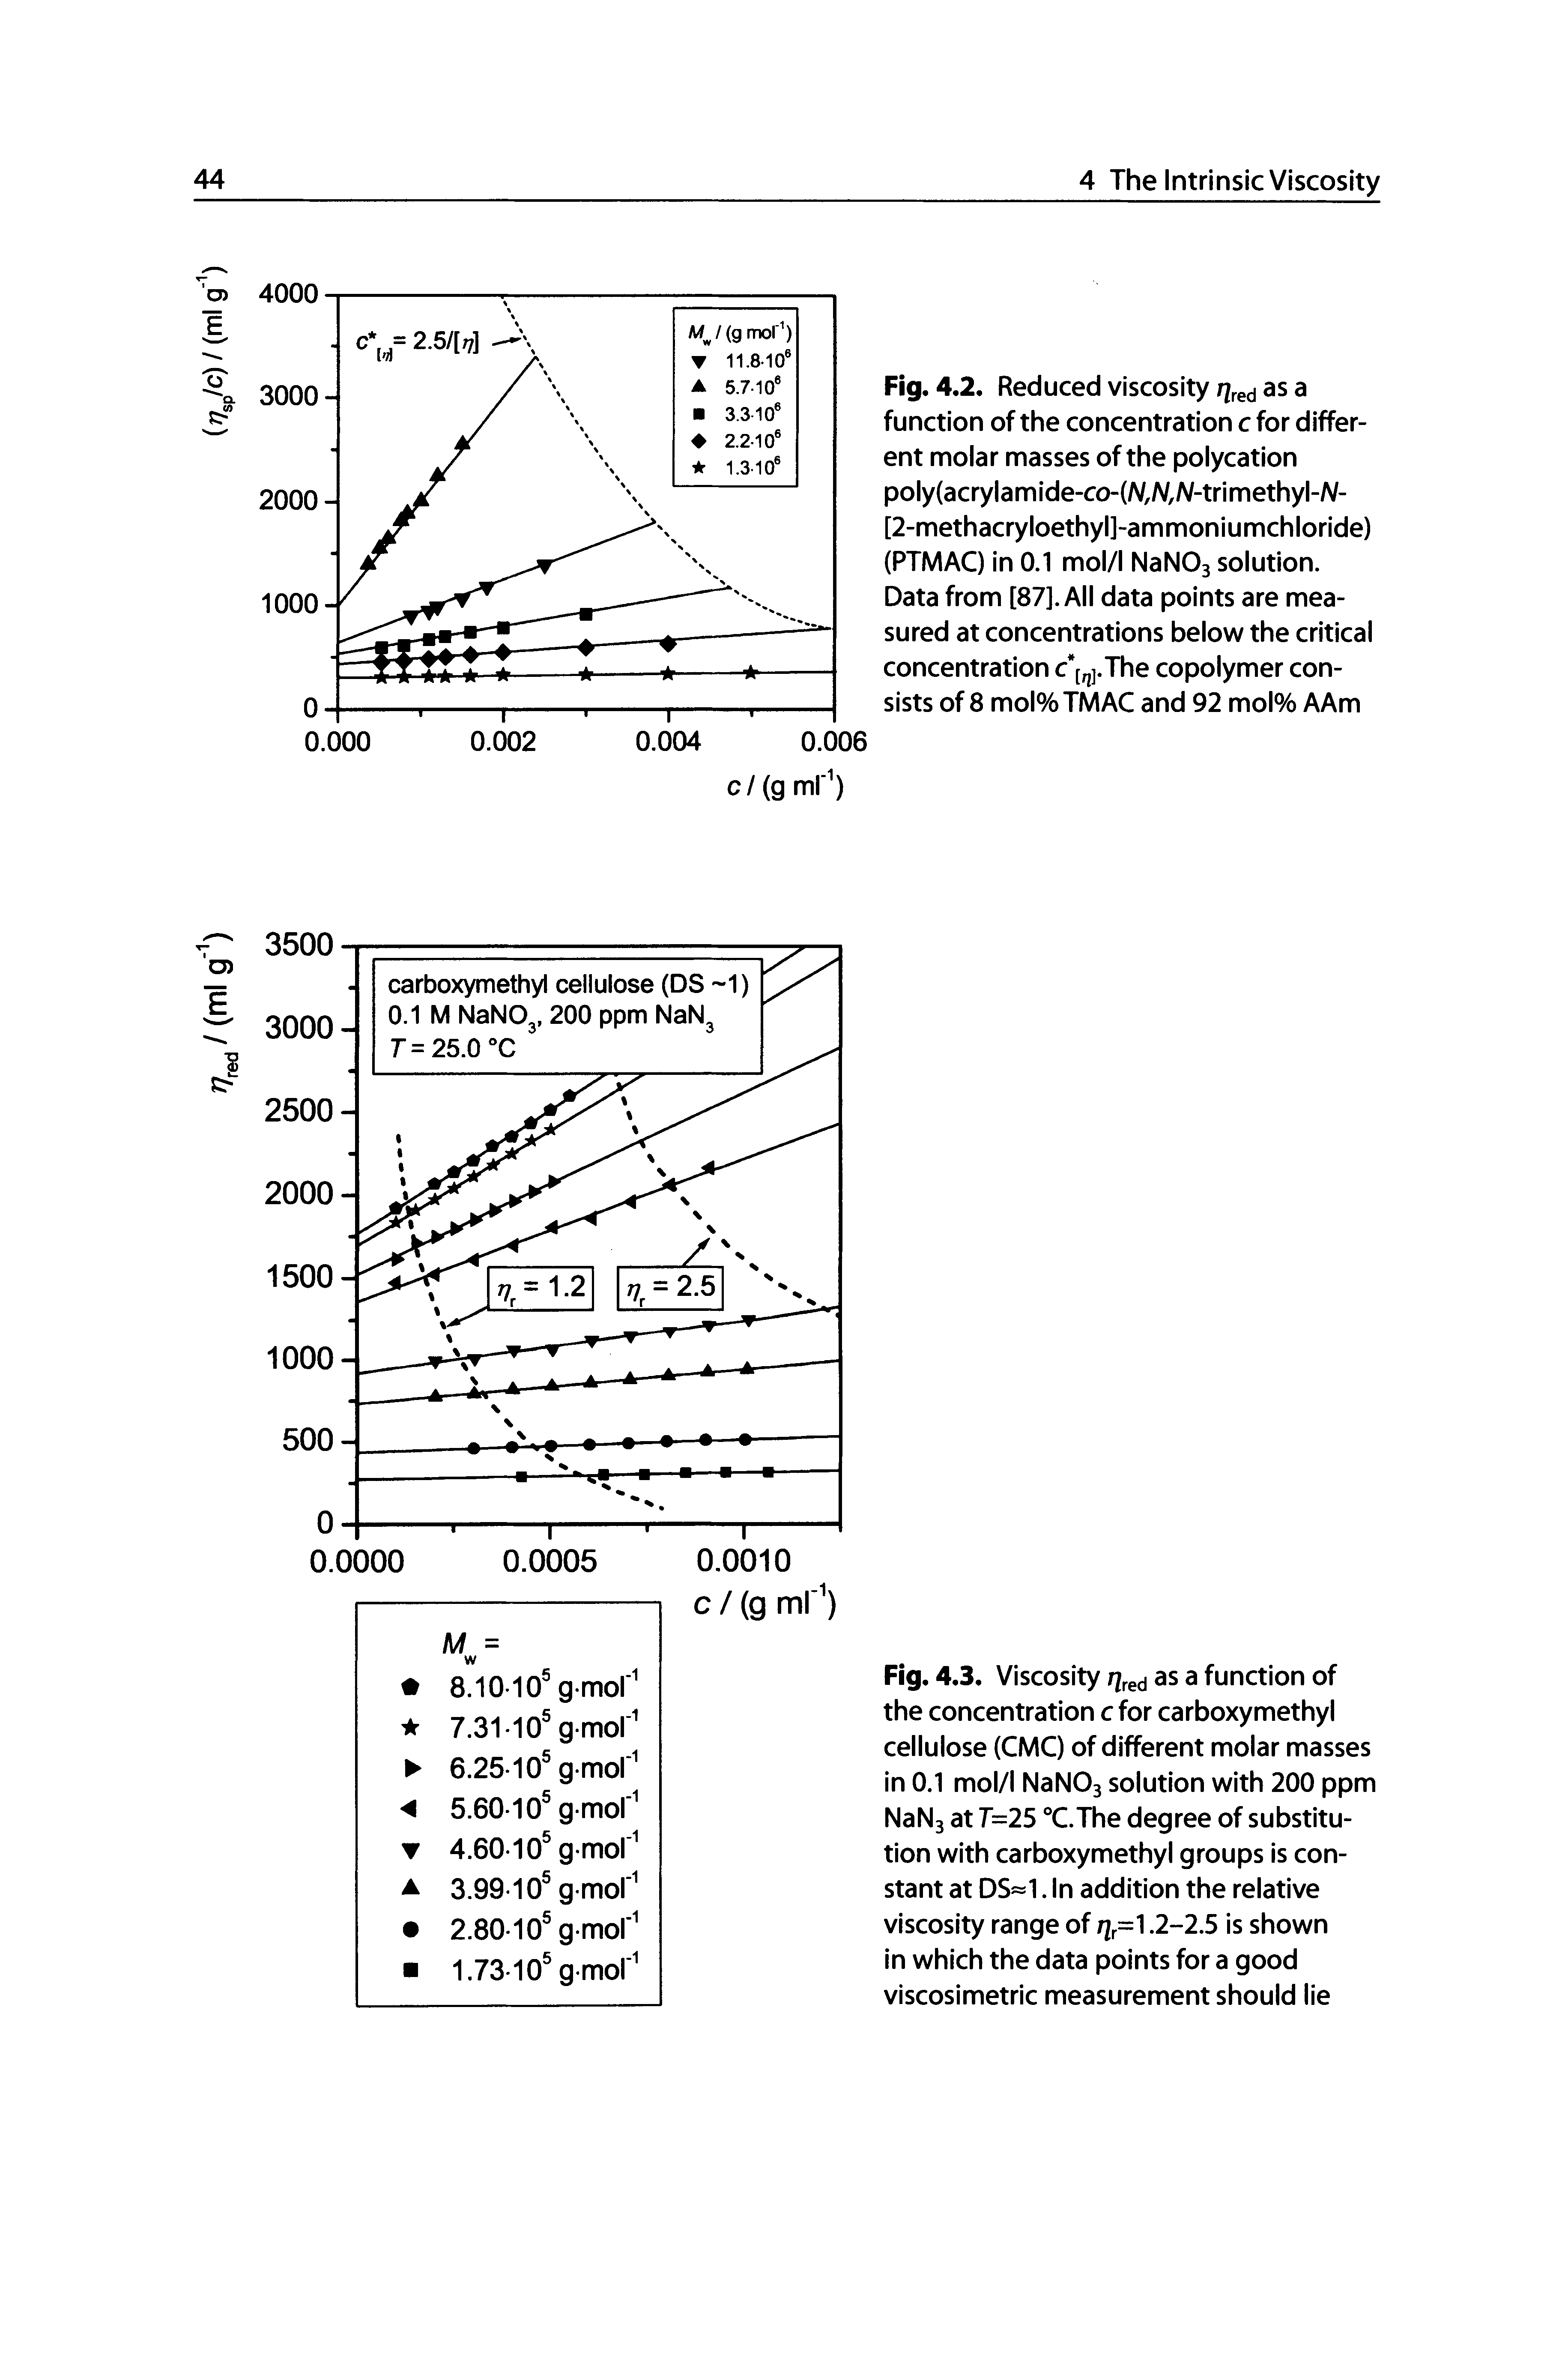 Fig. 4,2, Reduced viscosity q ed a function of the concentration c for different molar masses of the polycation poly(acrylamide-co-(A/,A/,A/-trimethyl-A/-[2-methacryloethyl]-ammoniumchloride) (PTMAC) in 0.1 mol/l NaN03 solution. Data from [87]. All data points are measured at concentrations below the critical concentration c [ j.The copolymer consists of 8 mol%TMAC and 92 mol% AAm...